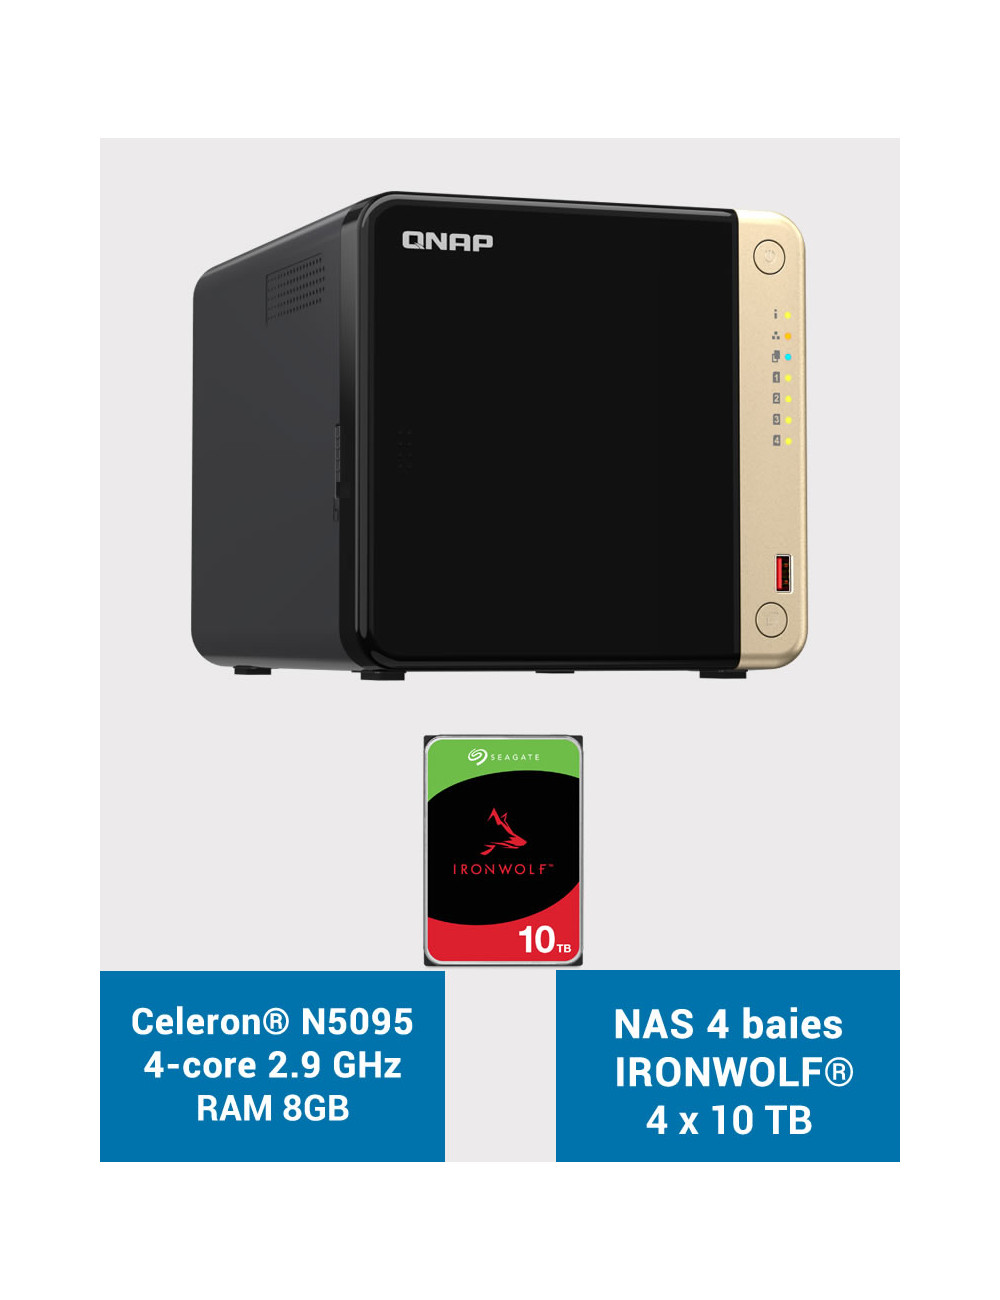 QNAP TS-464 8GB Serveur NAS 4 baies IRONWOLF 40To (4x10To)